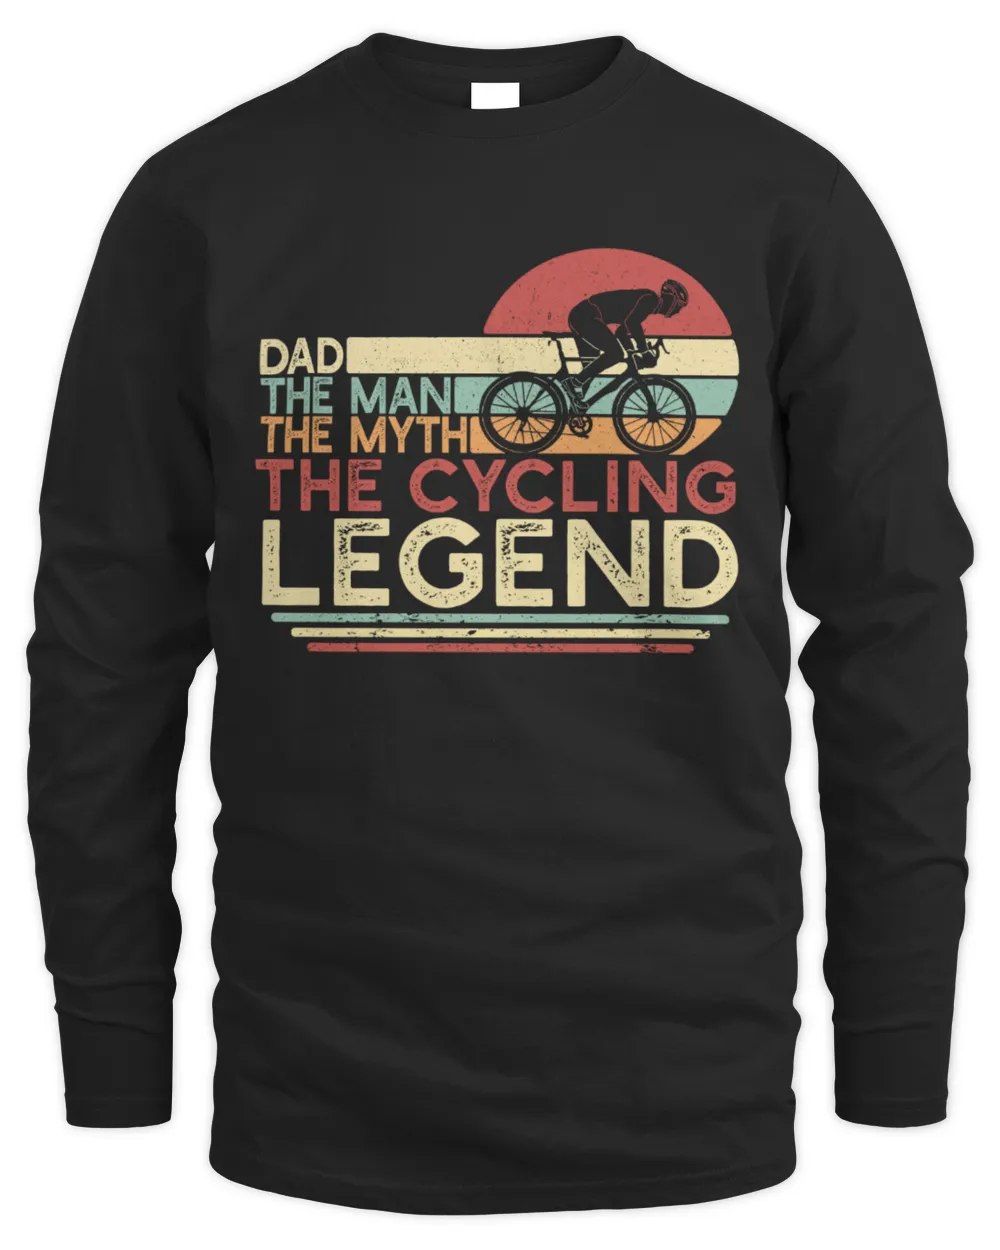 Dad The Man The Myth The Cycling Legend Shirt Men, Vintage Cyclist Dad T-shirt, Father's Day Gift for Bike Rider Bicycle Racing Unisex Tee